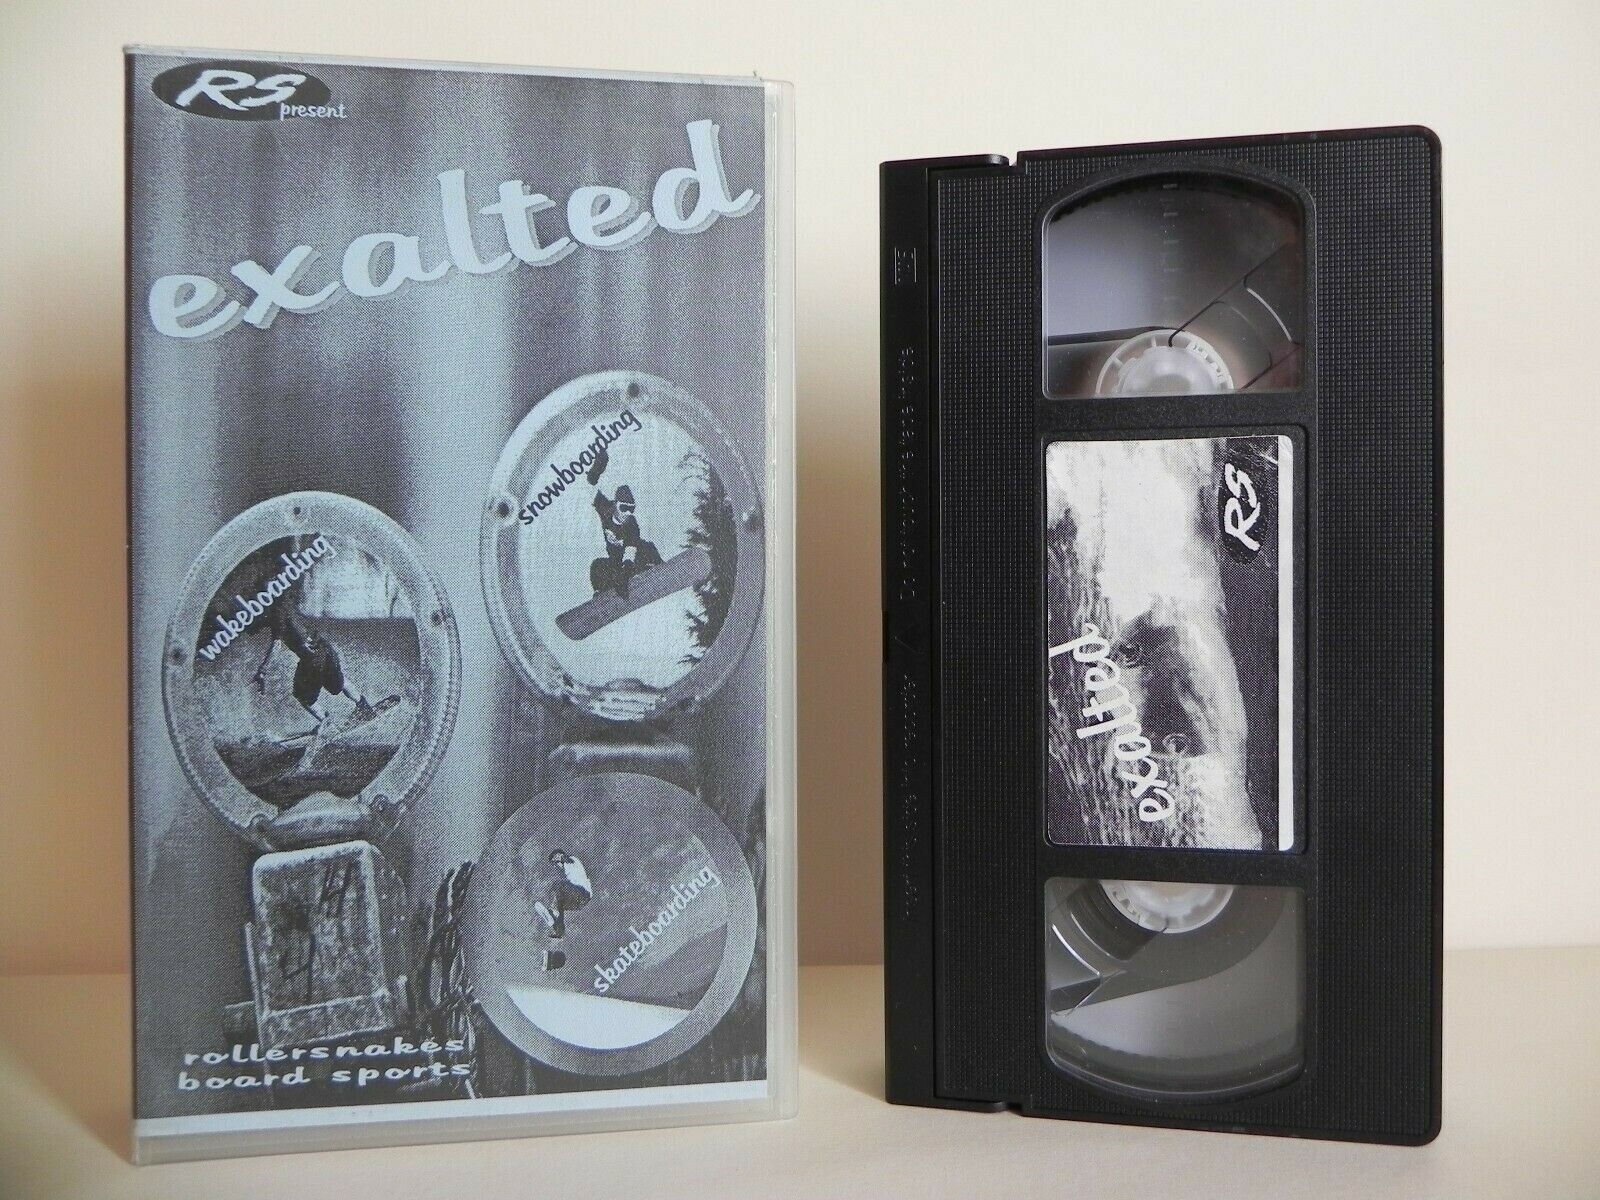 Exalted - Rollersnakes Board Sports - Snowboarding - Skateboarding - Pal VHS-